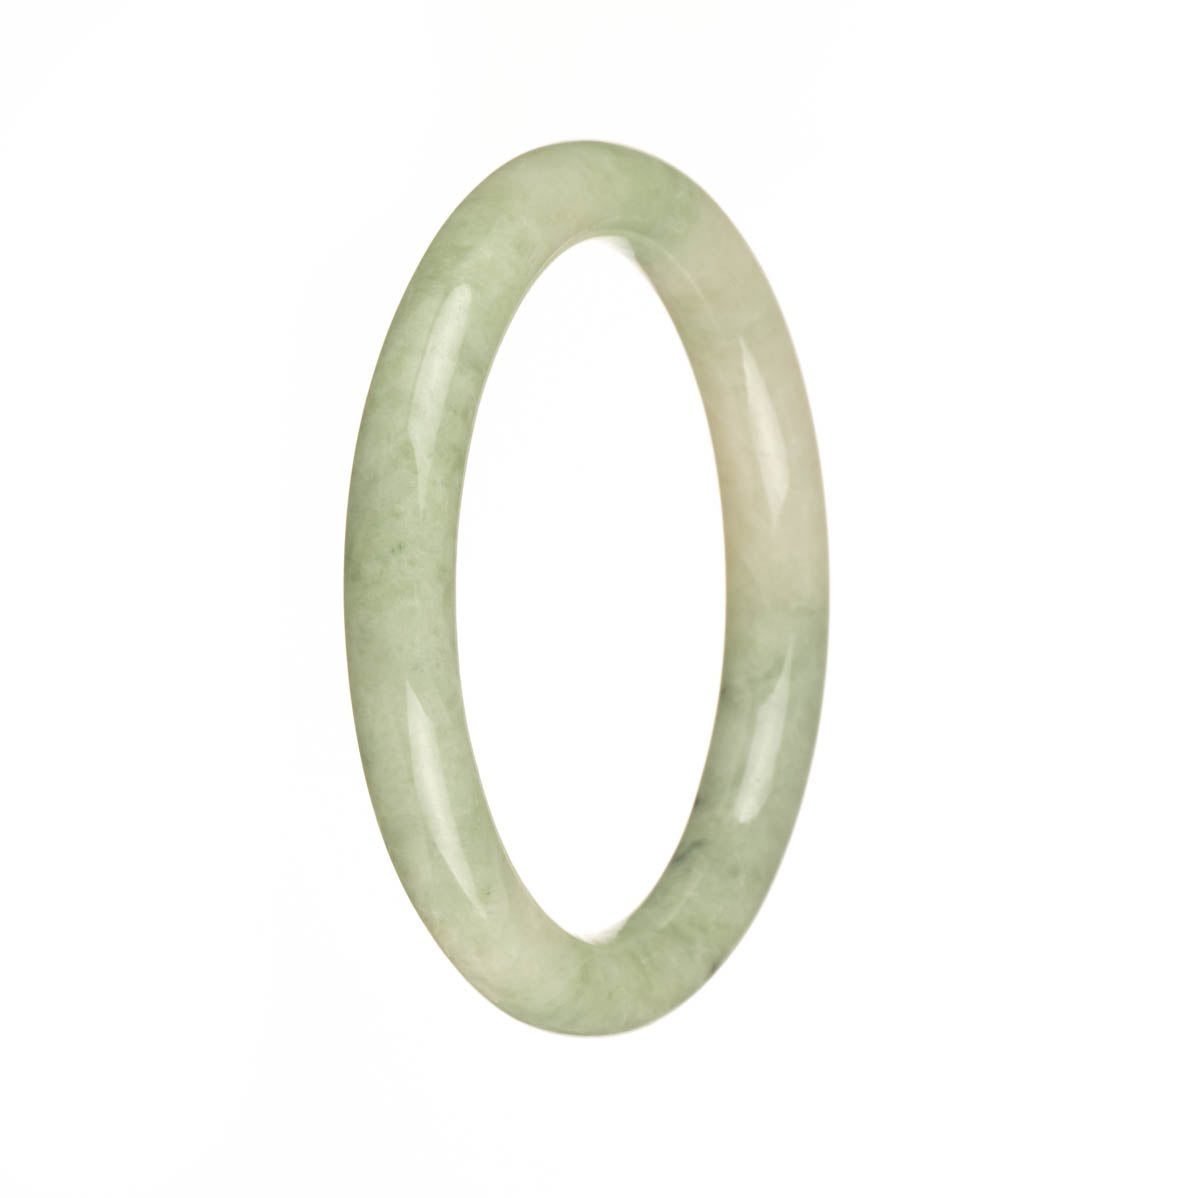 A close-up photo of a small round jade bracelet with green and white tones, featuring dark green spots throughout. This bracelet is made of genuine Type A Burma jade and measures 55mm in diameter. Perfect for those who prefer a petite and elegant style.